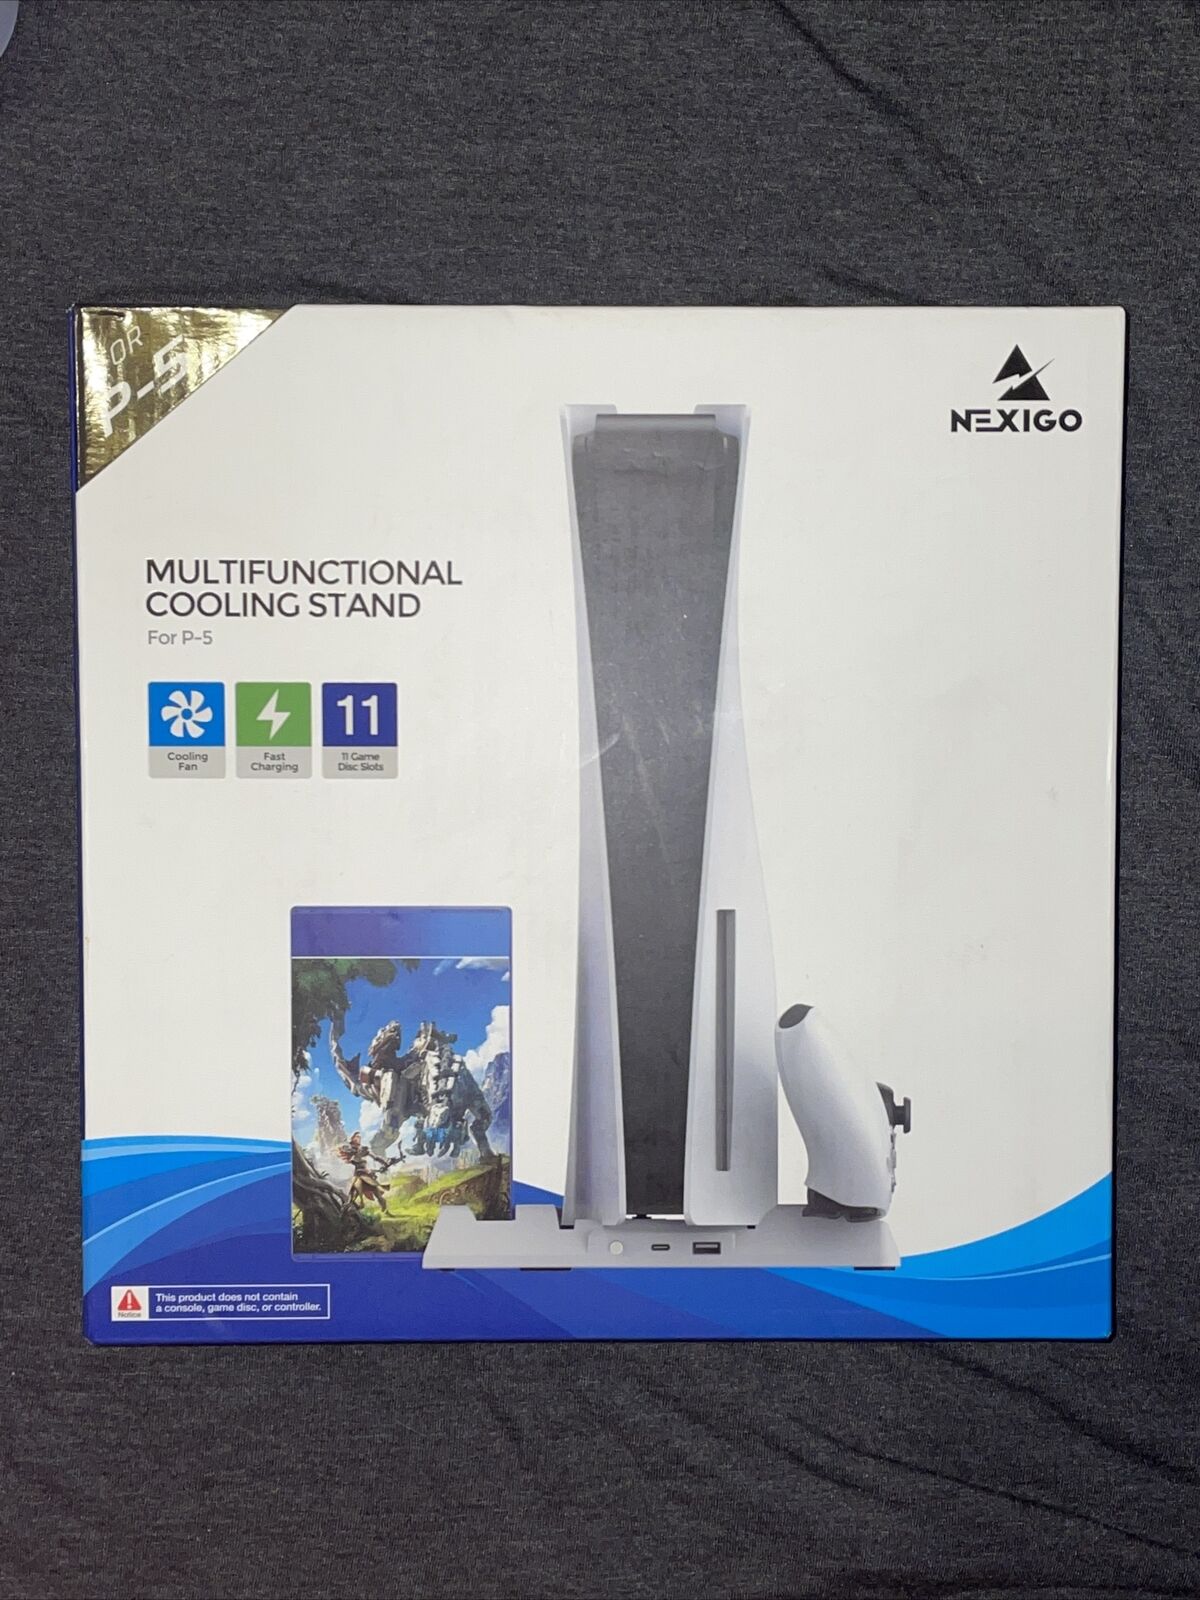 NEW For PS5 Nexigo 93％以上節約 Cooling Stand With Game Slots Digital 2021特集 + Chargers Disc Dual